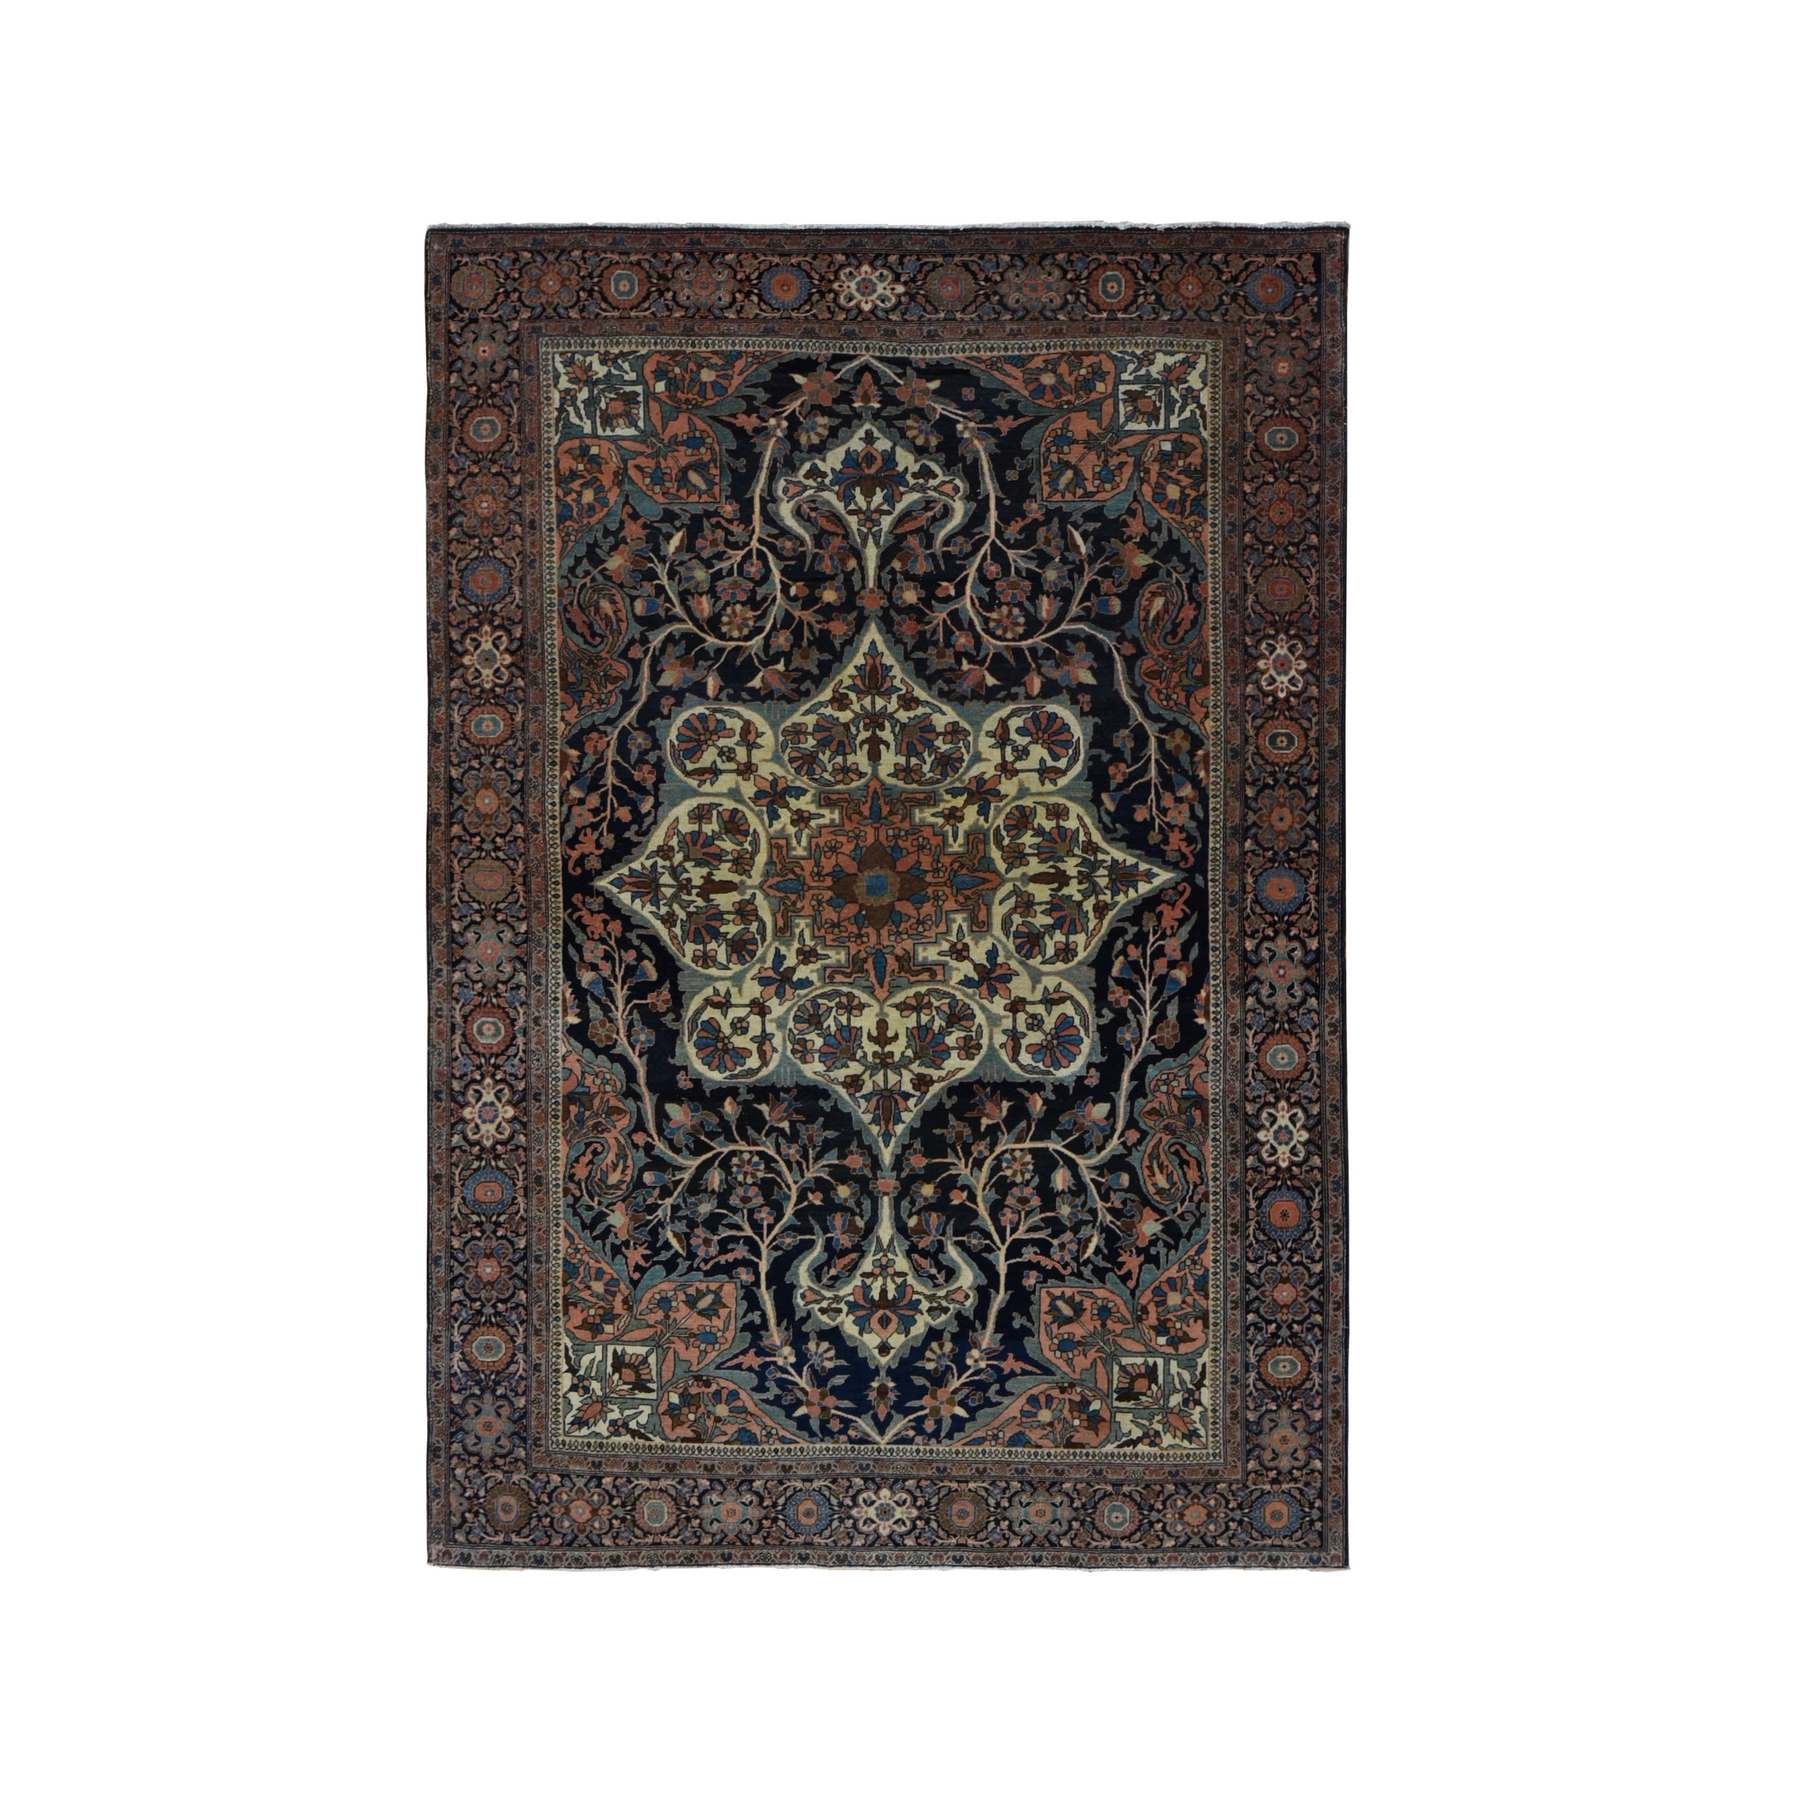 Antique-Hand-Knotted-Rug-438195